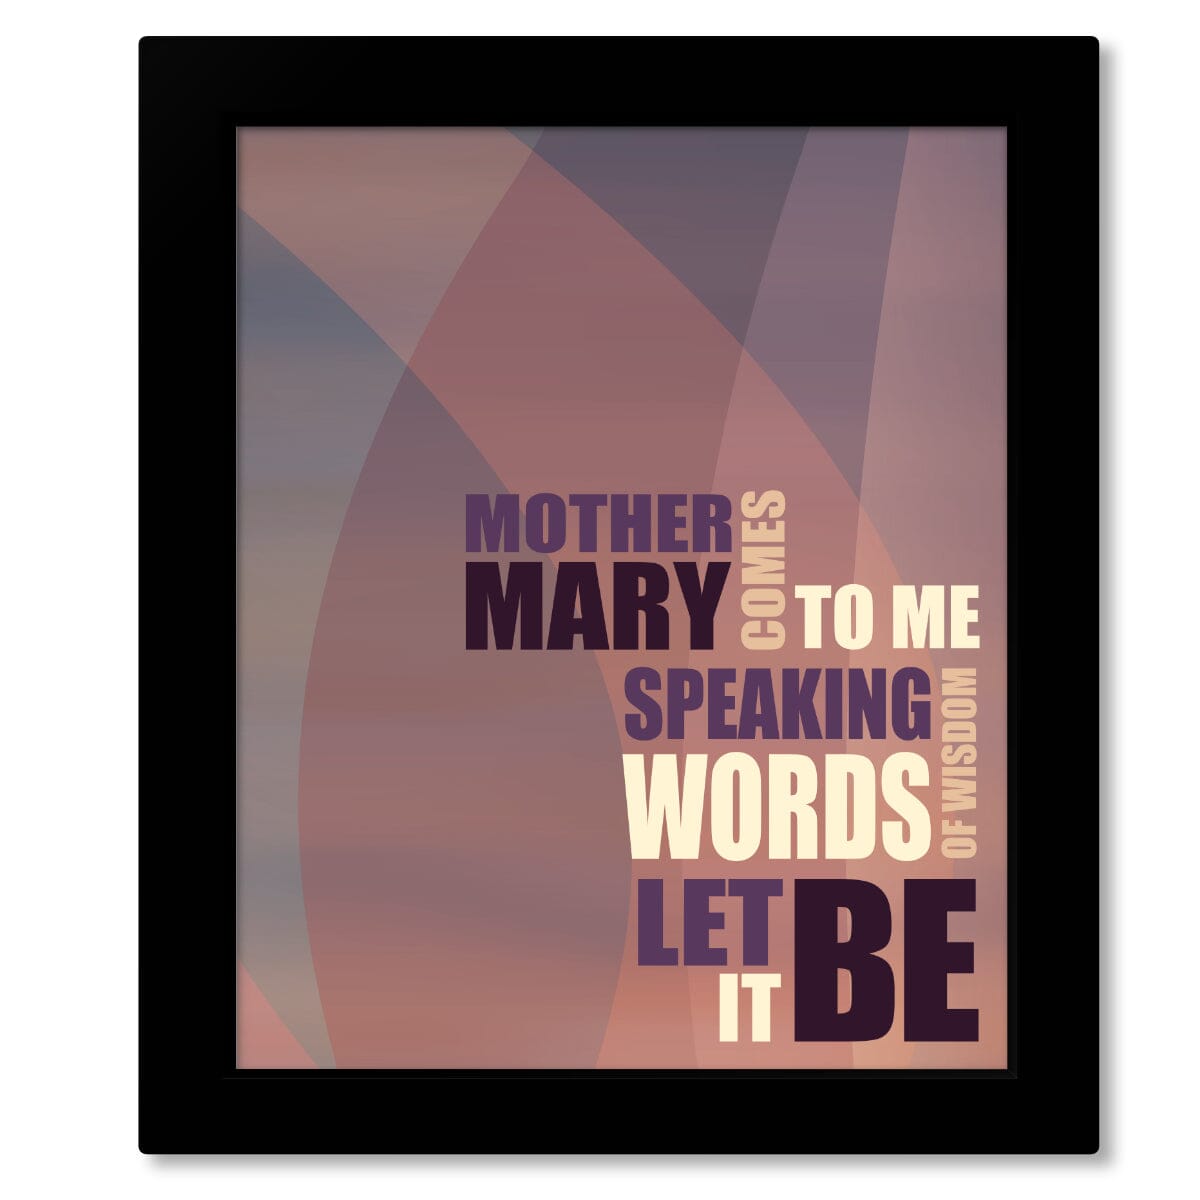 Let It Be by the Beatles - Wall Music Song Lyric Art Print Song Lyrics Art Song Lyrics Art 8x10 Framed Print (without mat) 